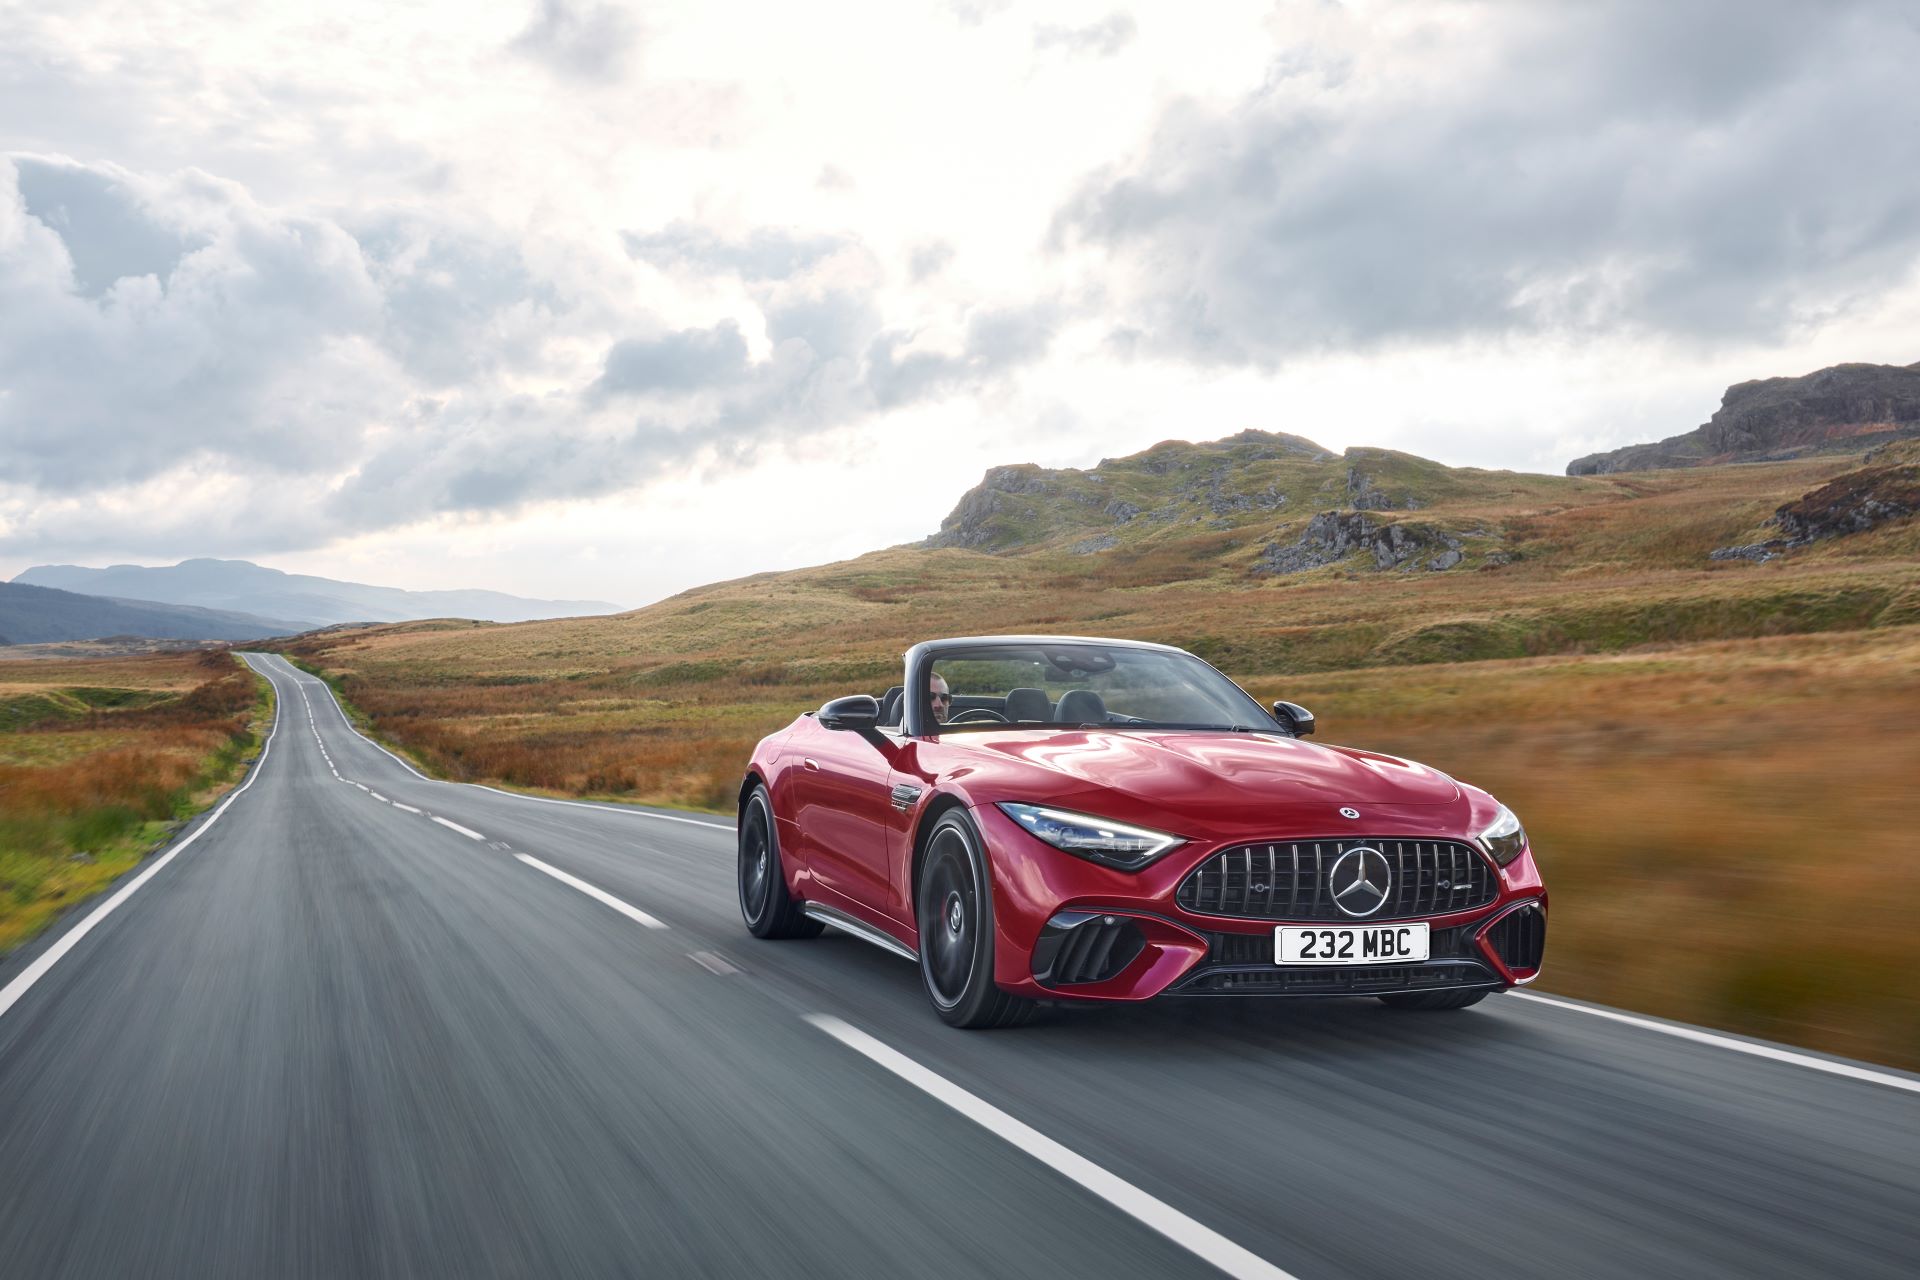 Mercedes Amg Sl Wins The Sunday Times Legend Car Of The Year Award